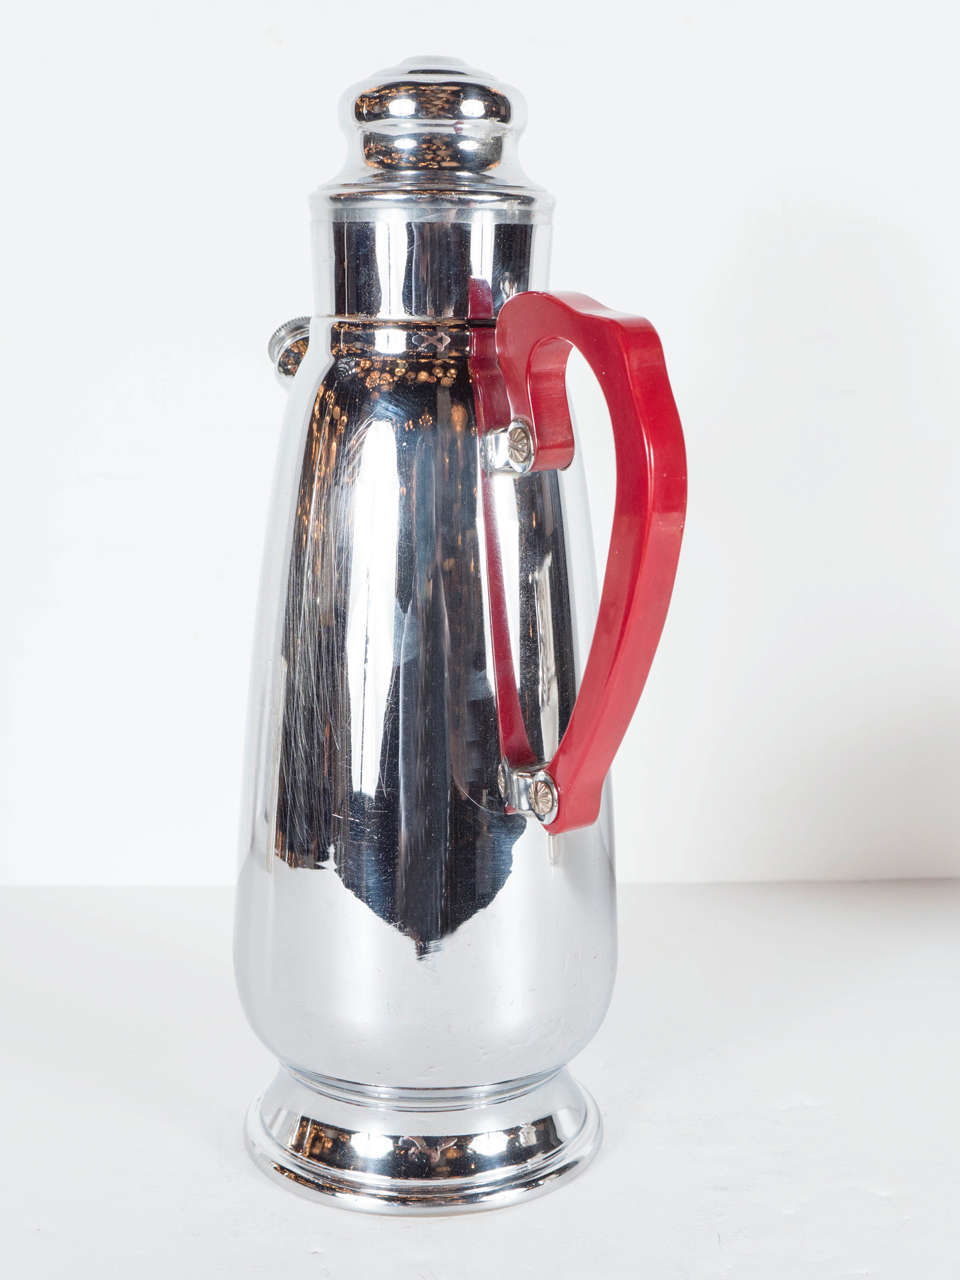 This gorgeous cocktail shaker is chrome with a red bakelite handle handle and epitomizes the Machine Ages influence on Art Deco in America.